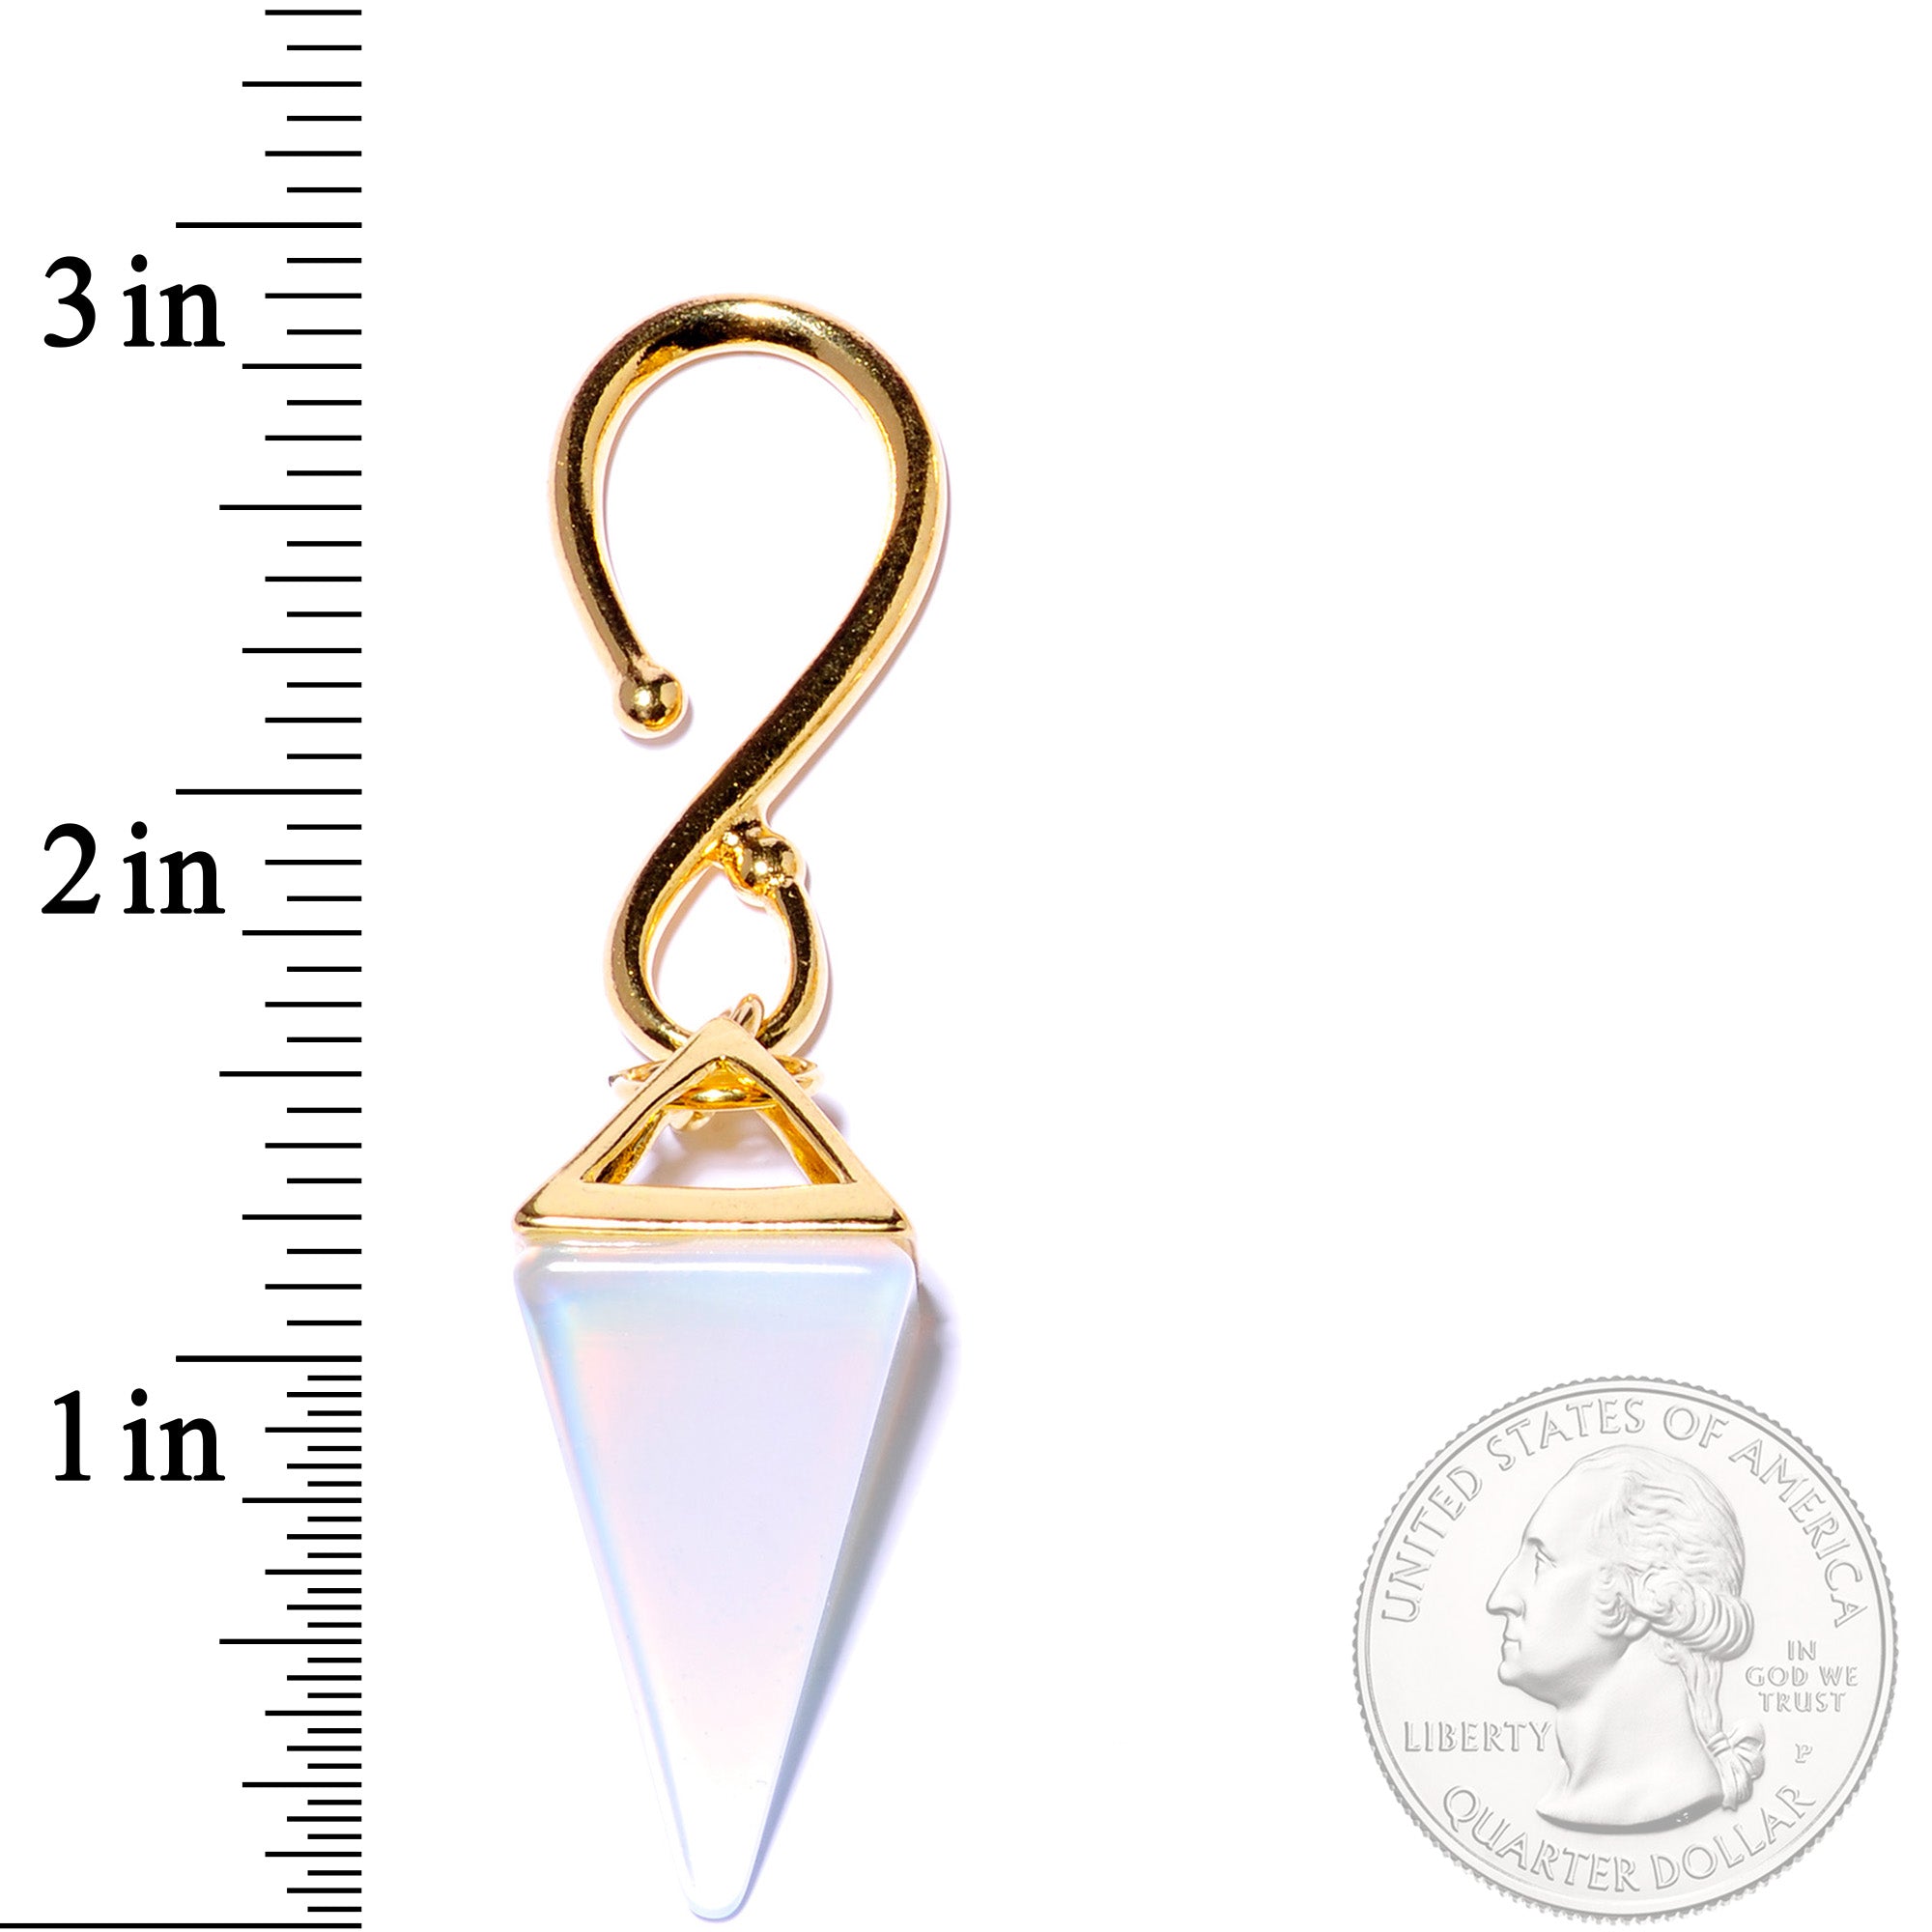 Handcrafted Gold Plated White Opalite Pyramid Ear Weights